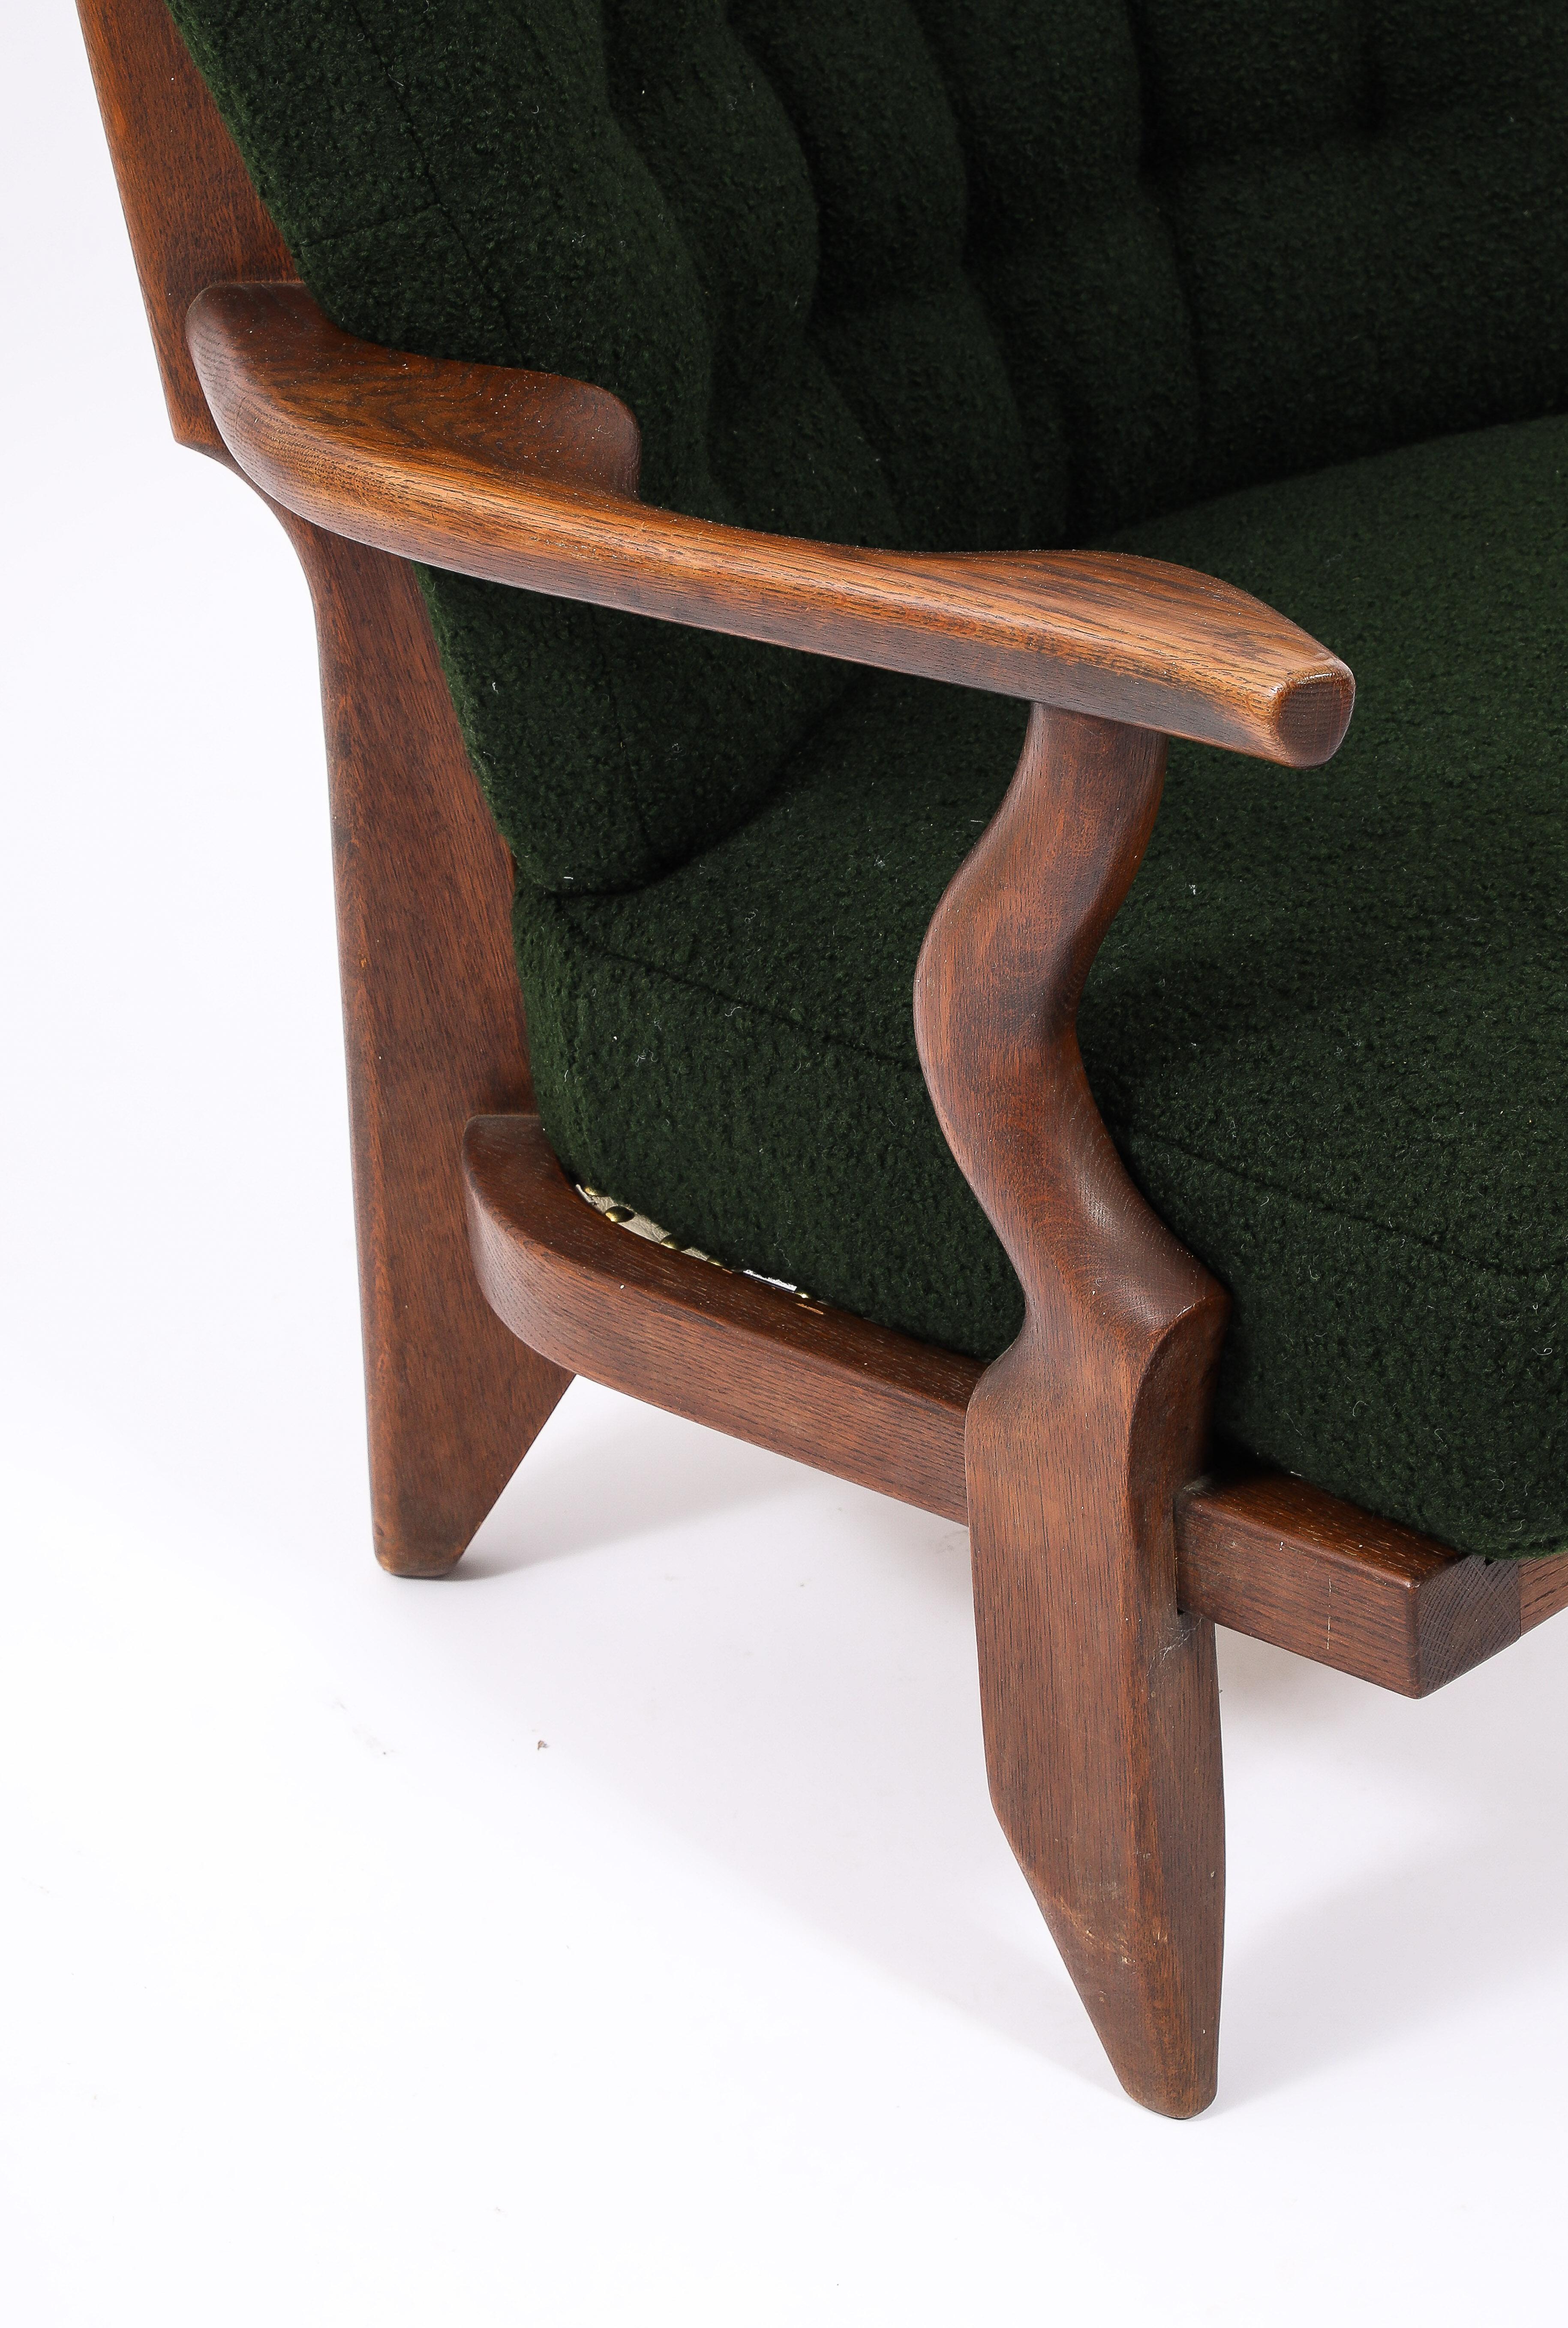 Guillerme & Chambron Petit Repos Armchair in Green Bouclé, France 1950's For Sale 8